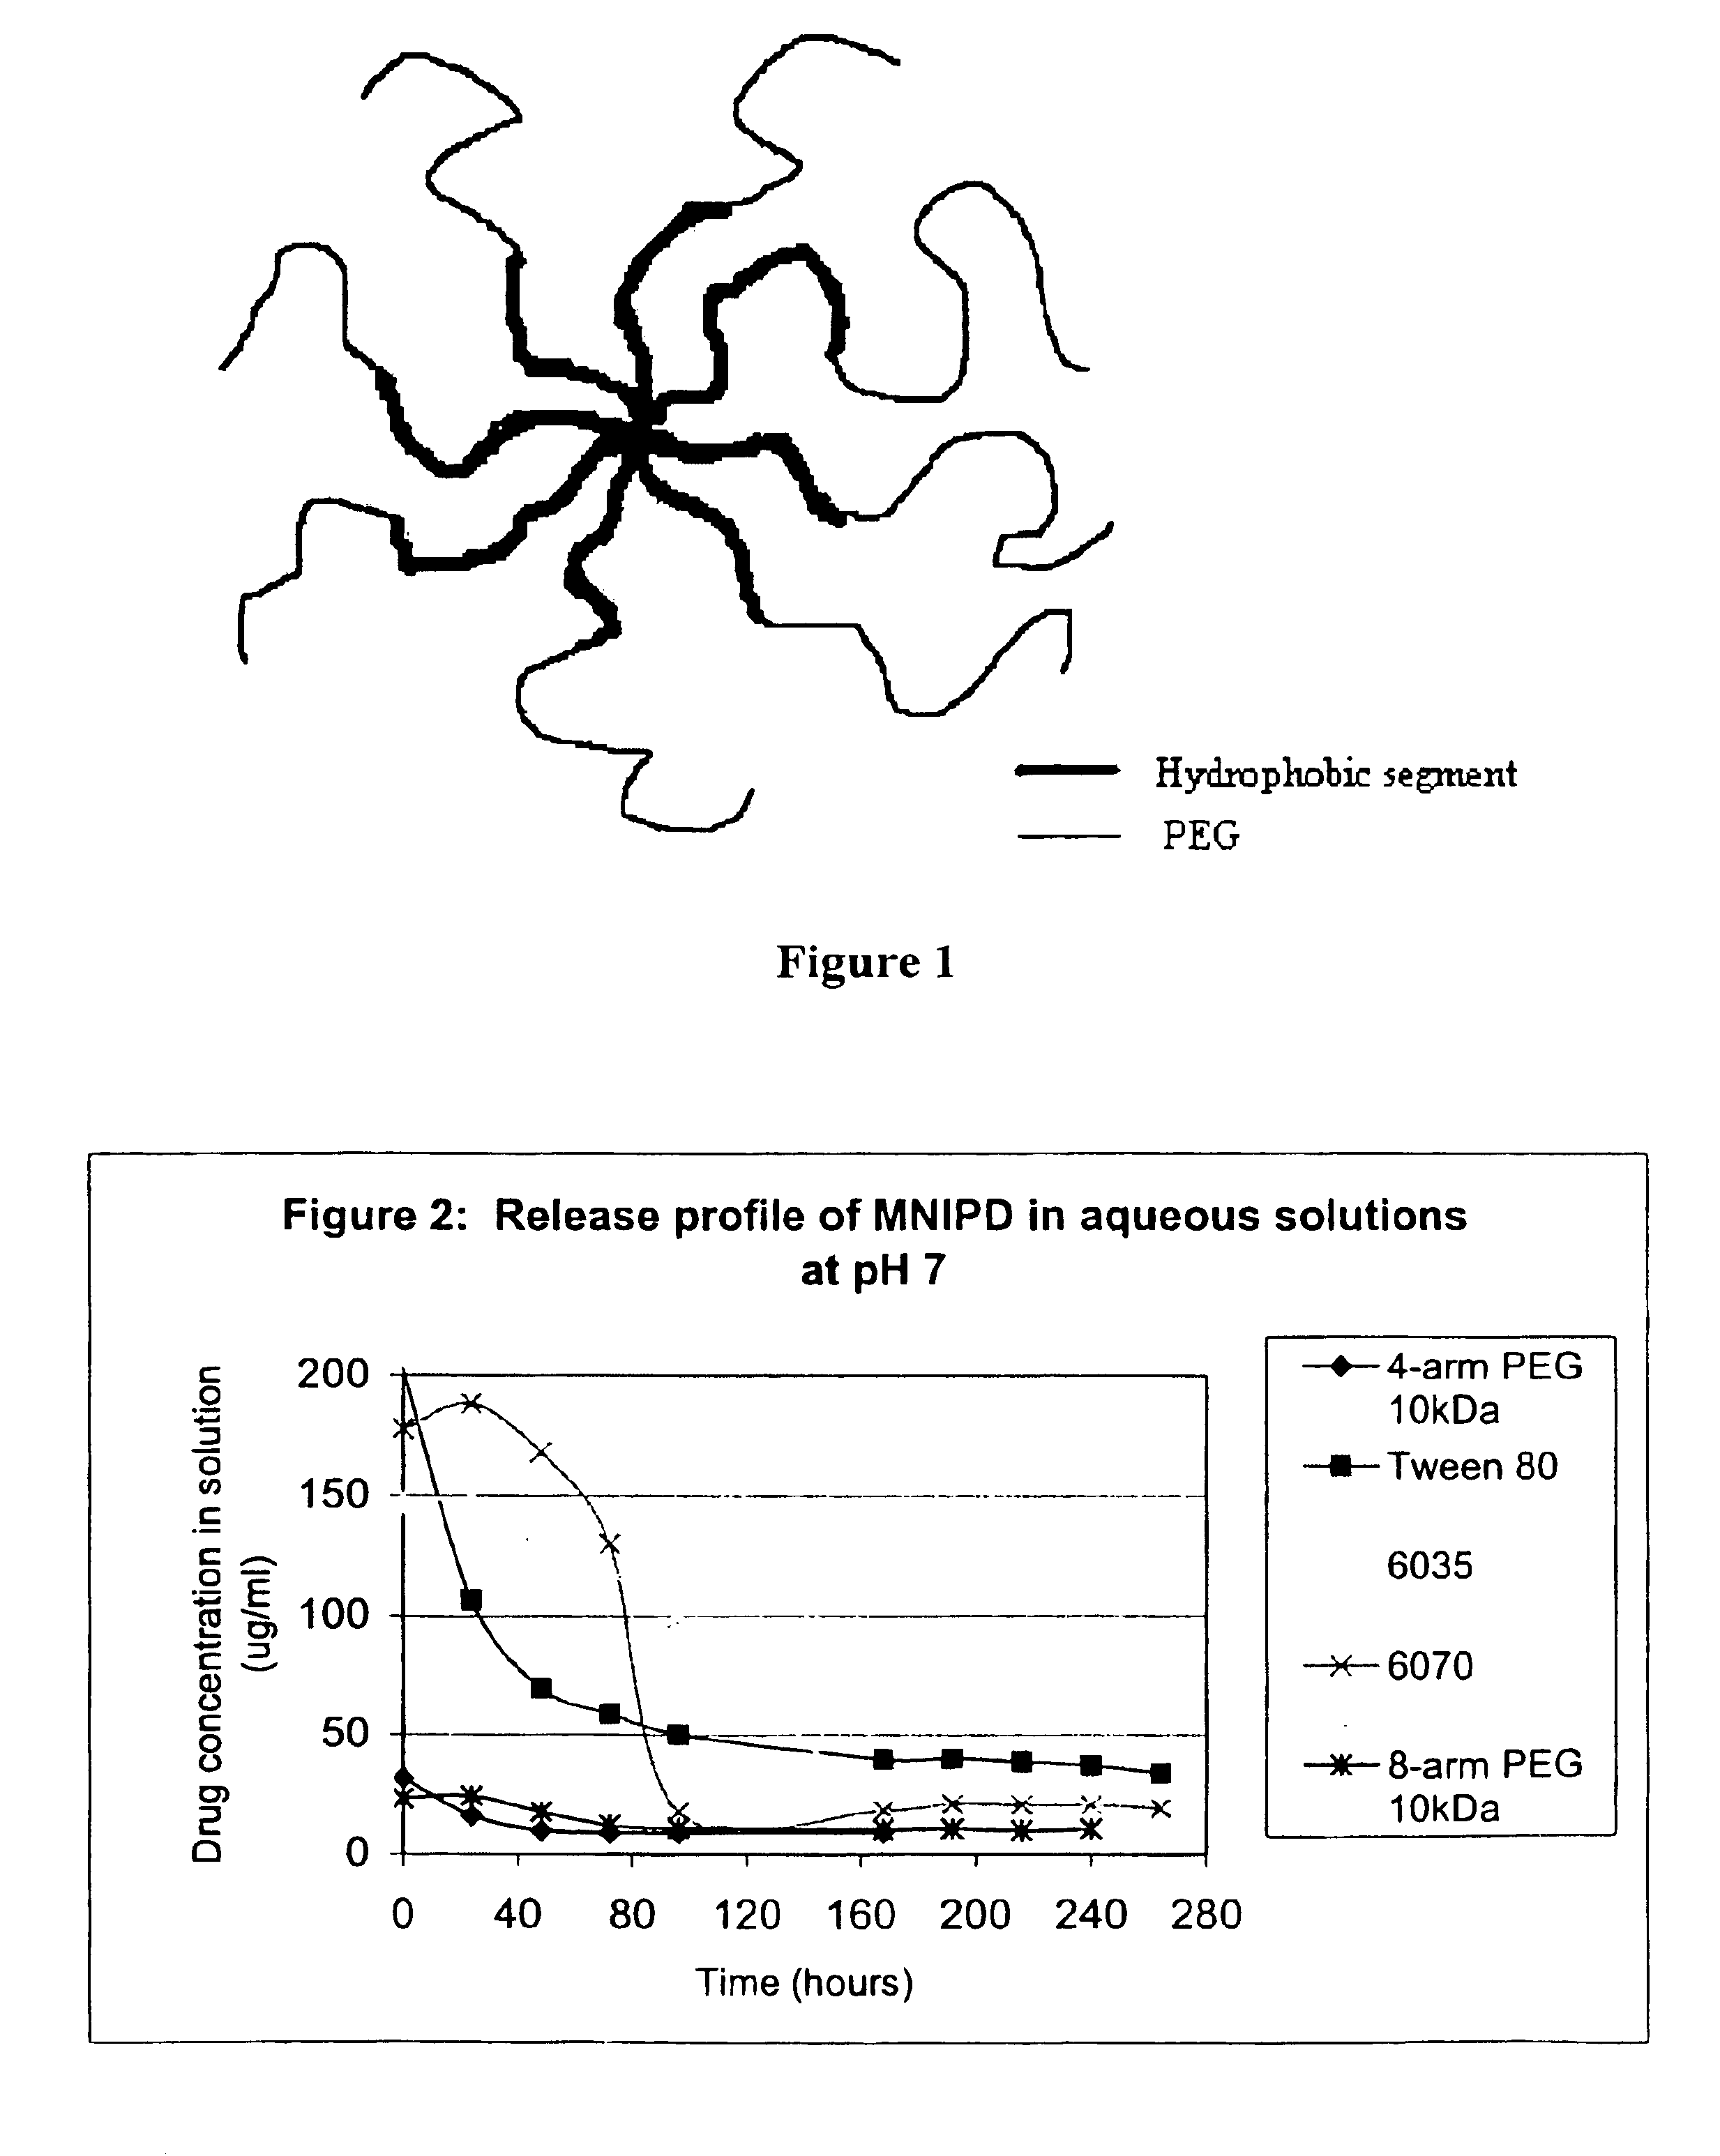 Multi-arm block copolymers as drug delivery vehicles